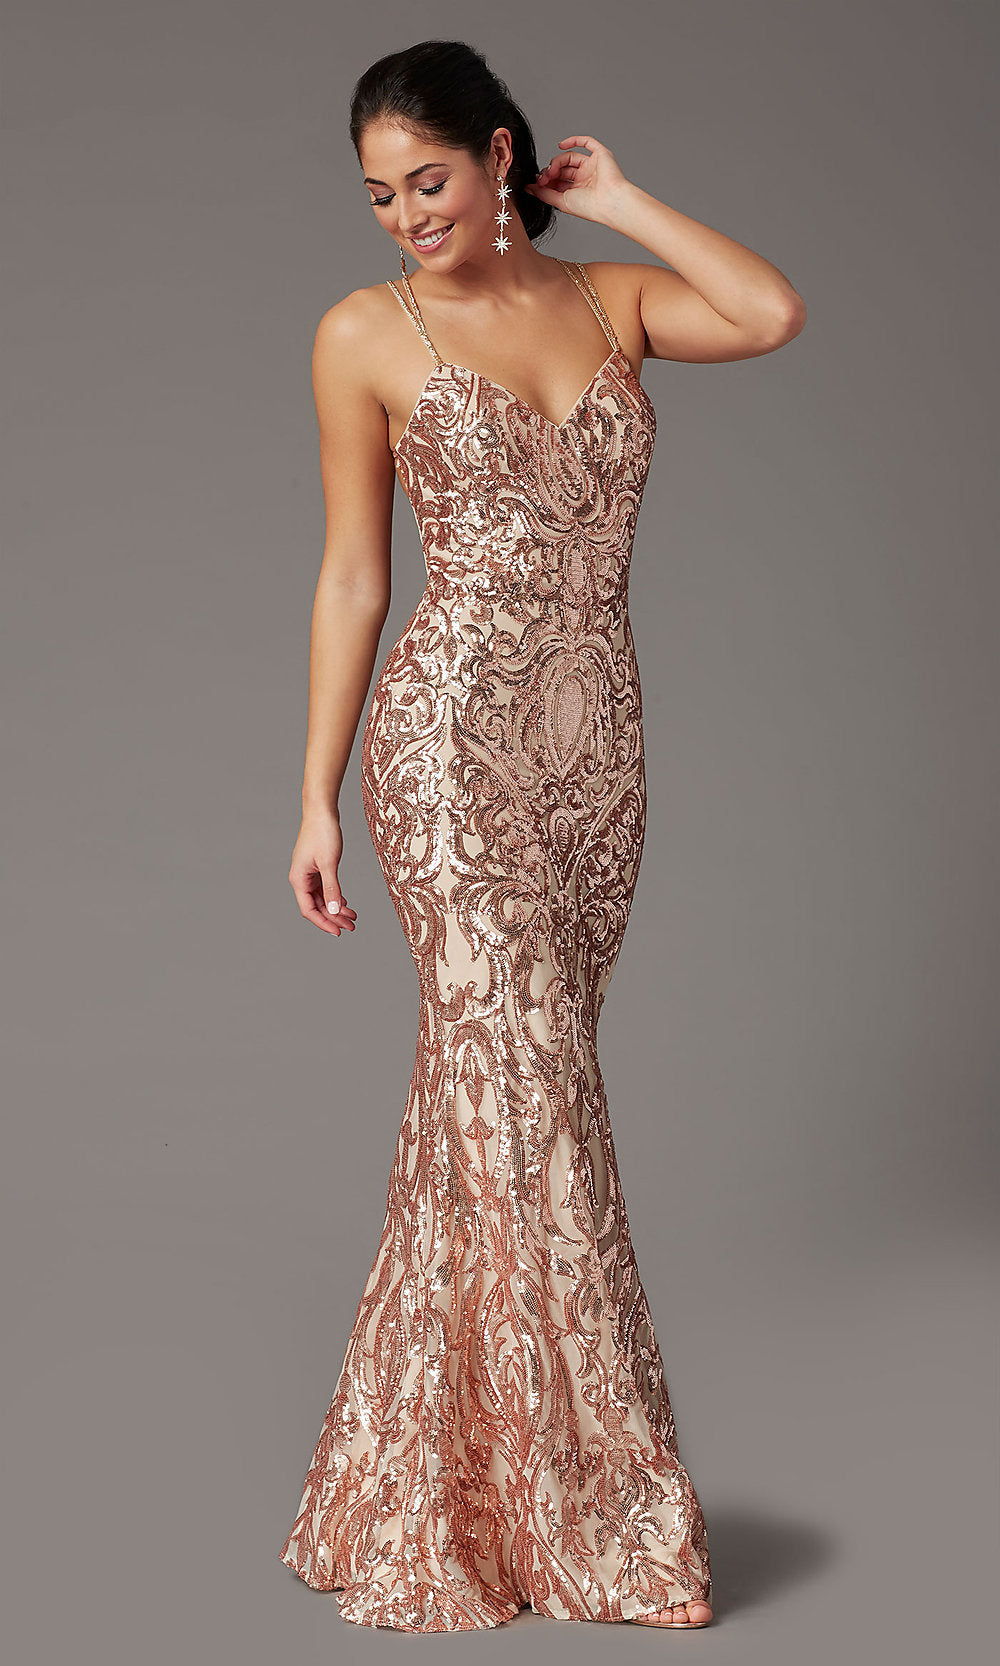  Backless Long Sequin Formal Prom Dress by PromGirl